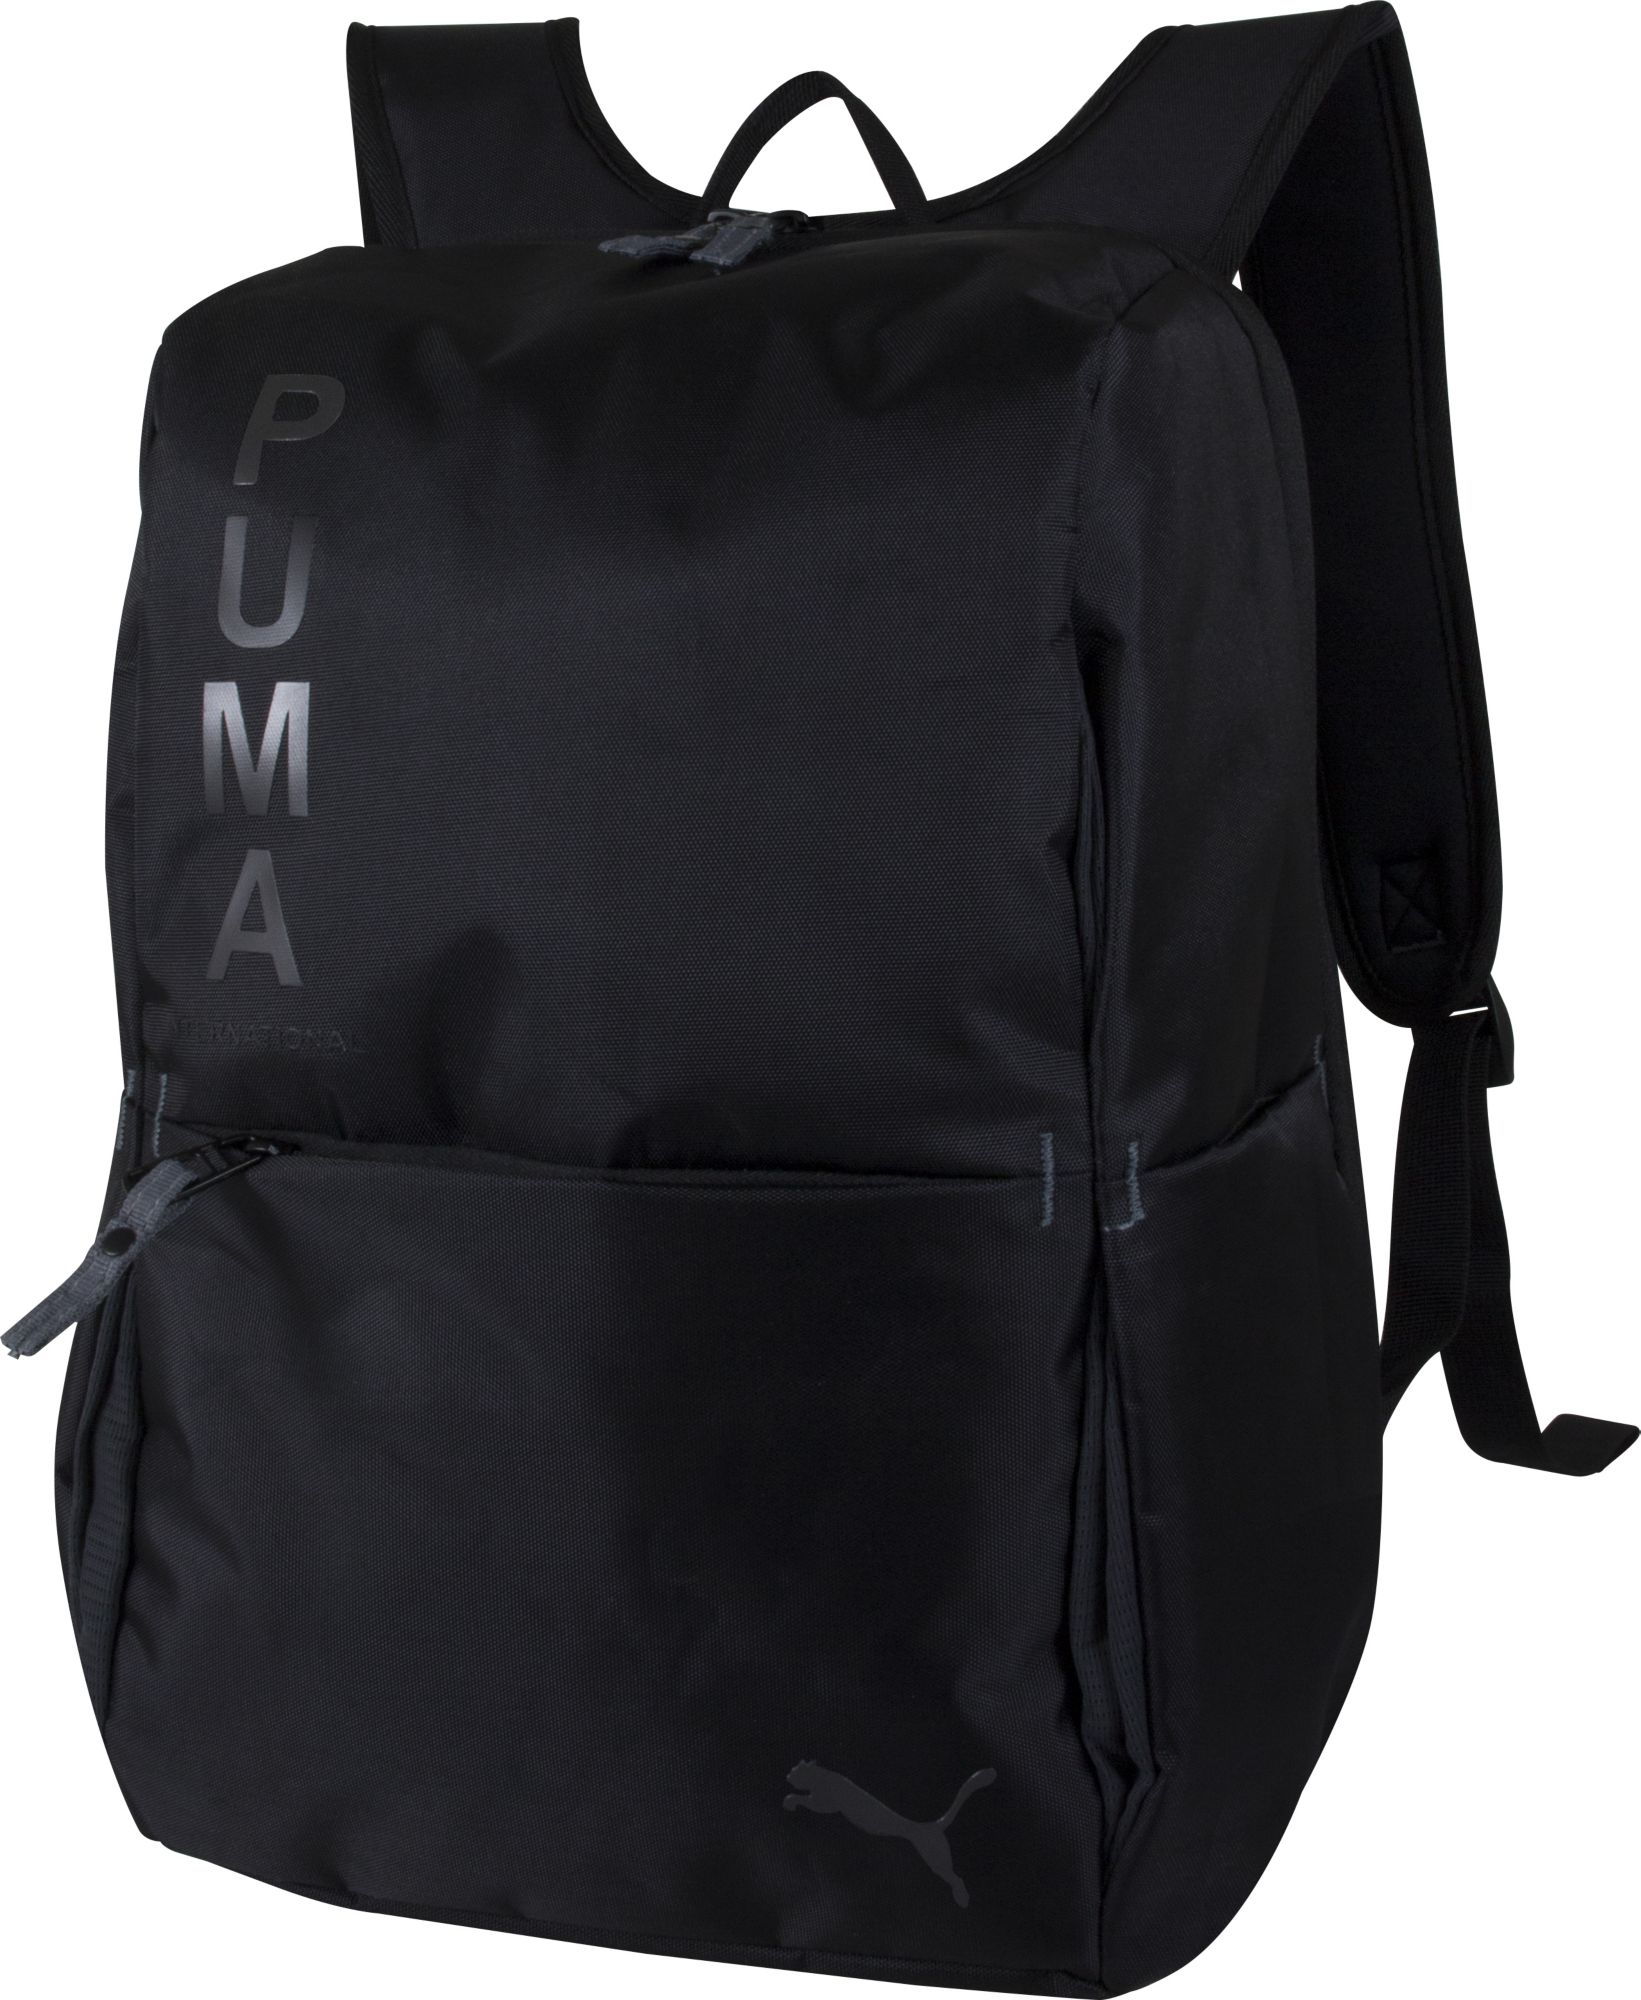 PUMA Ace Backpack | DICK'S Sporting Goods